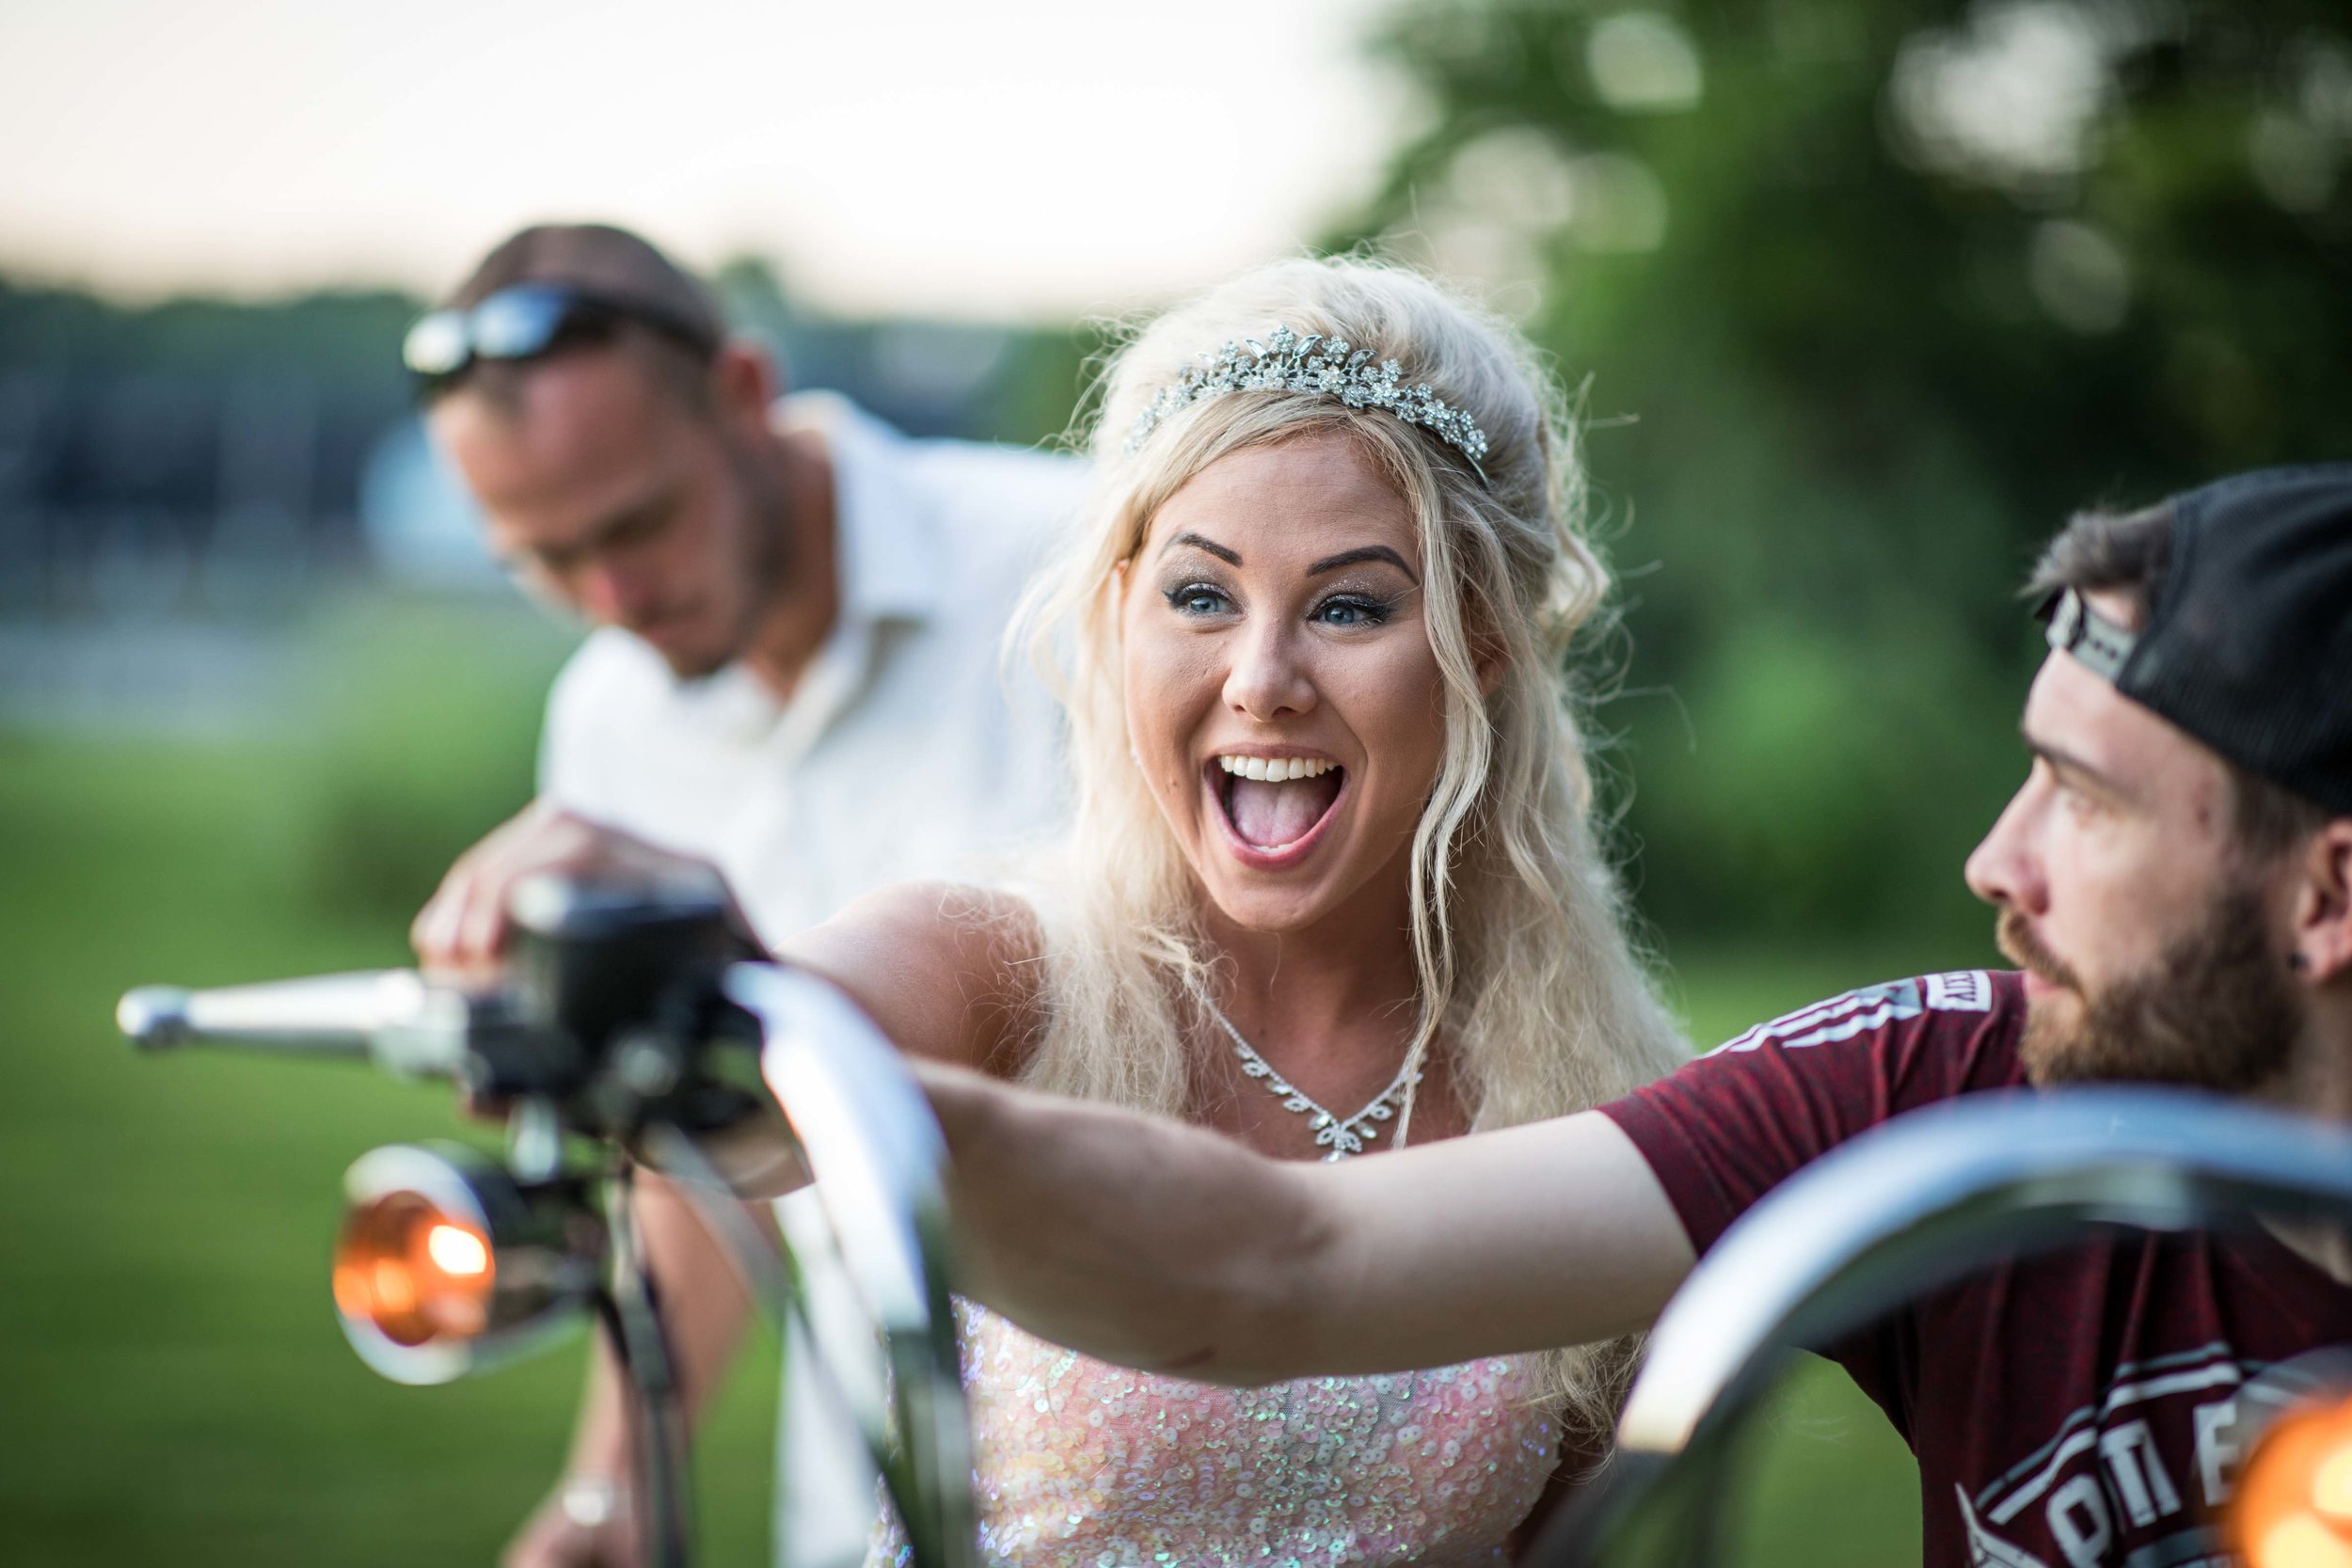  The Bride looks excited as she revs the engine of a motorcycle 